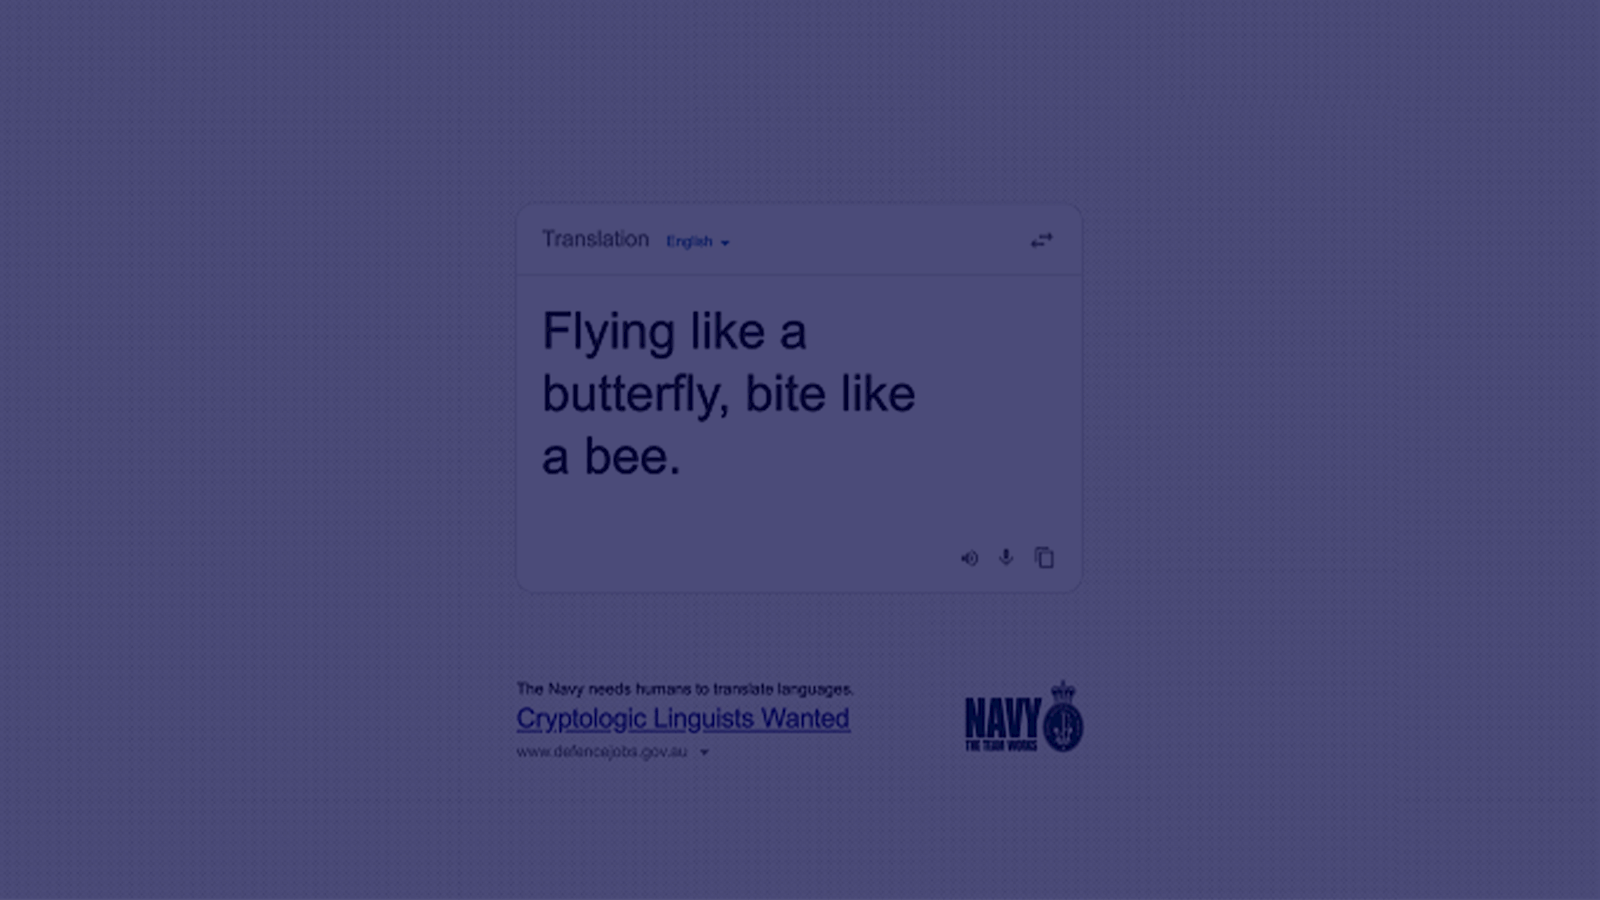 Screen of Google translate with text "flying like a butterfly, bite like aa bee"